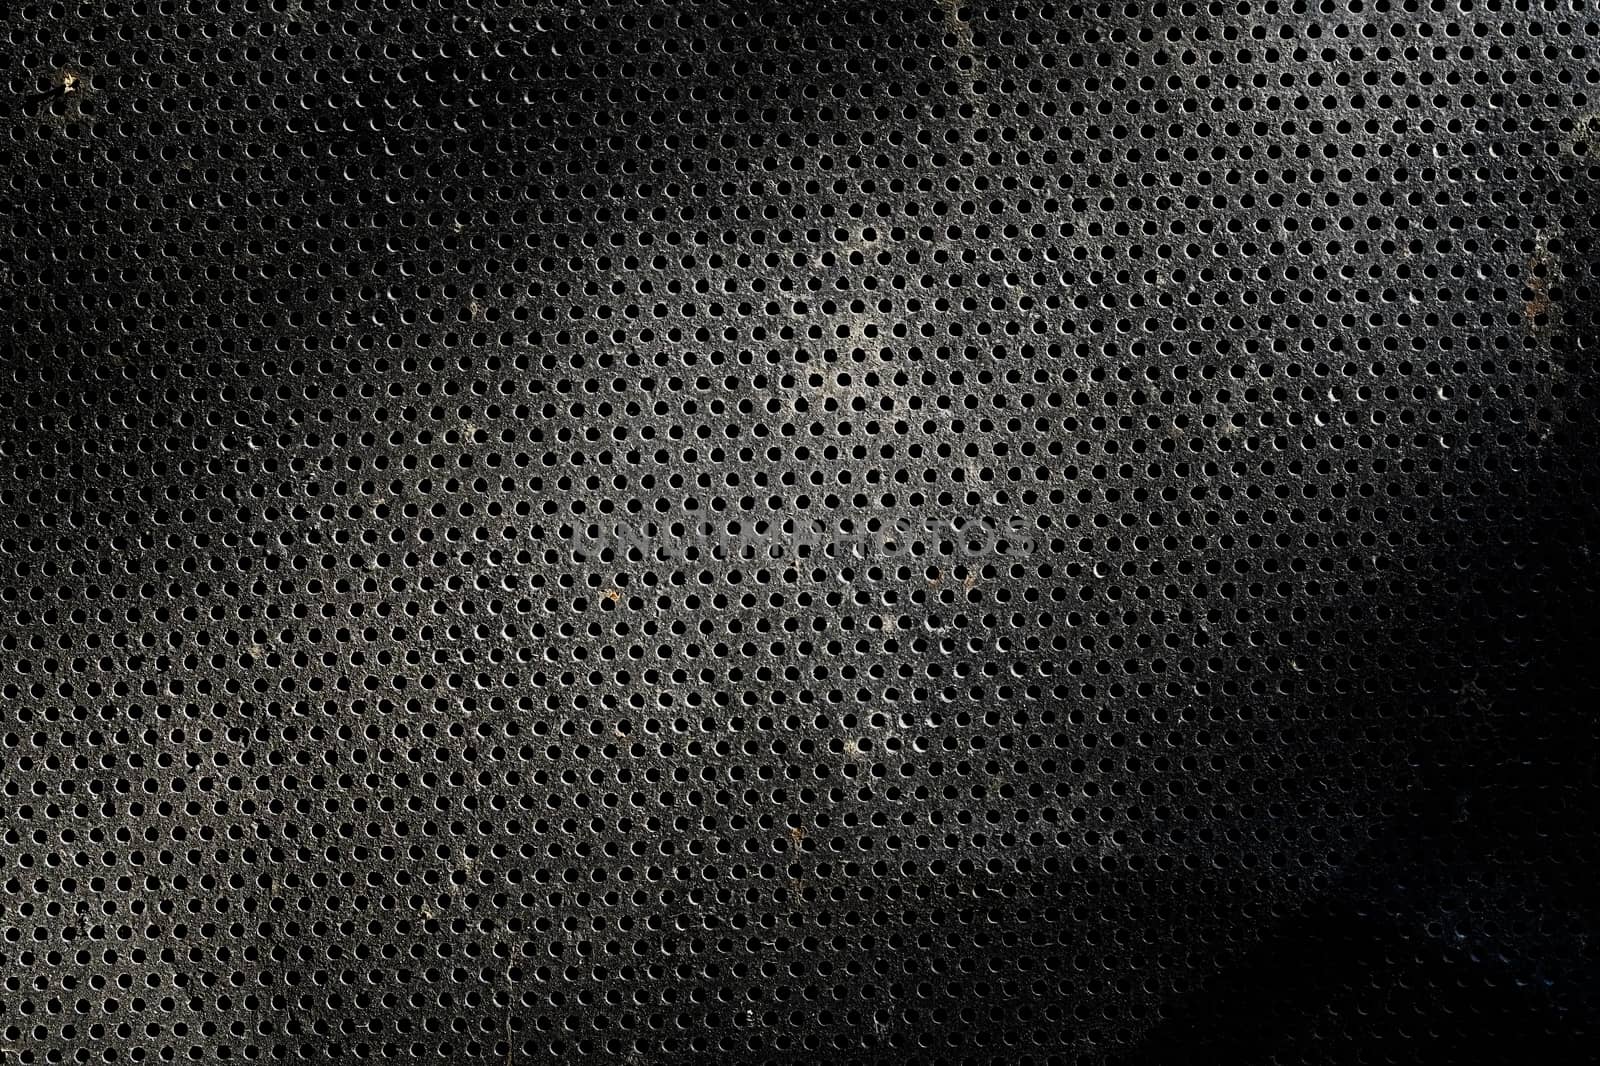 metal texture with round holes honeycomb pattern